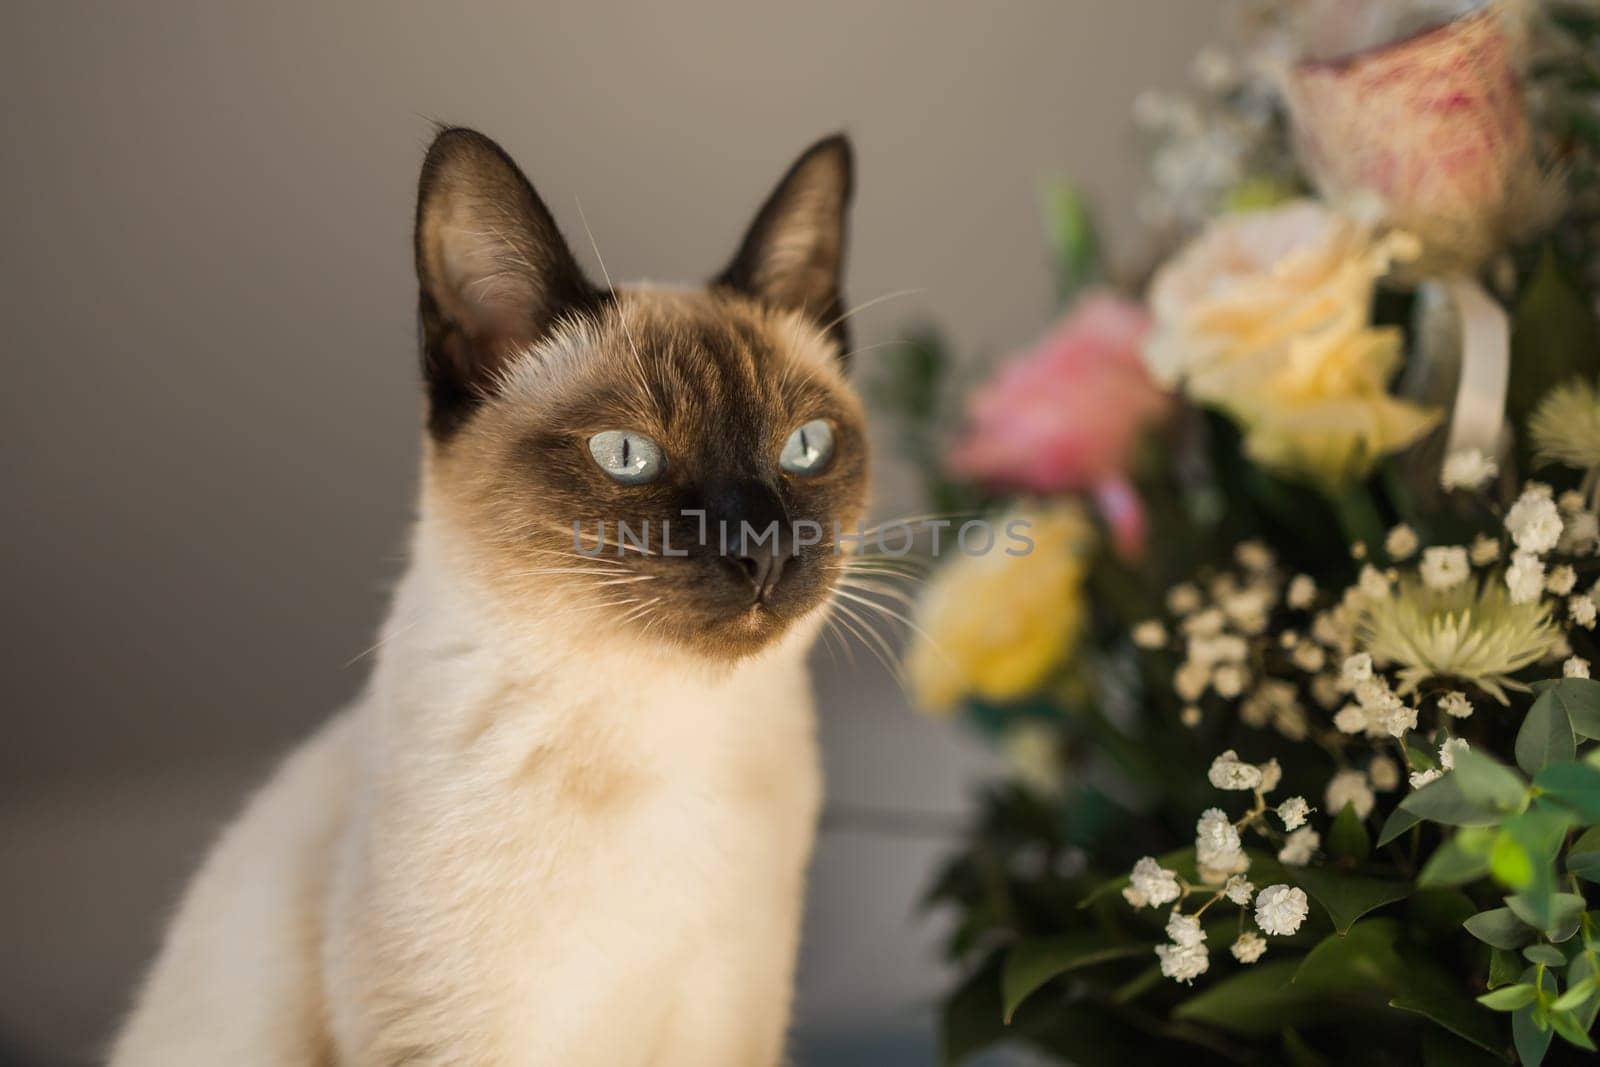 Hungry siamese cat portrait. Kitten is smelling flowers waiting for snacks on background of basket with roses at home.